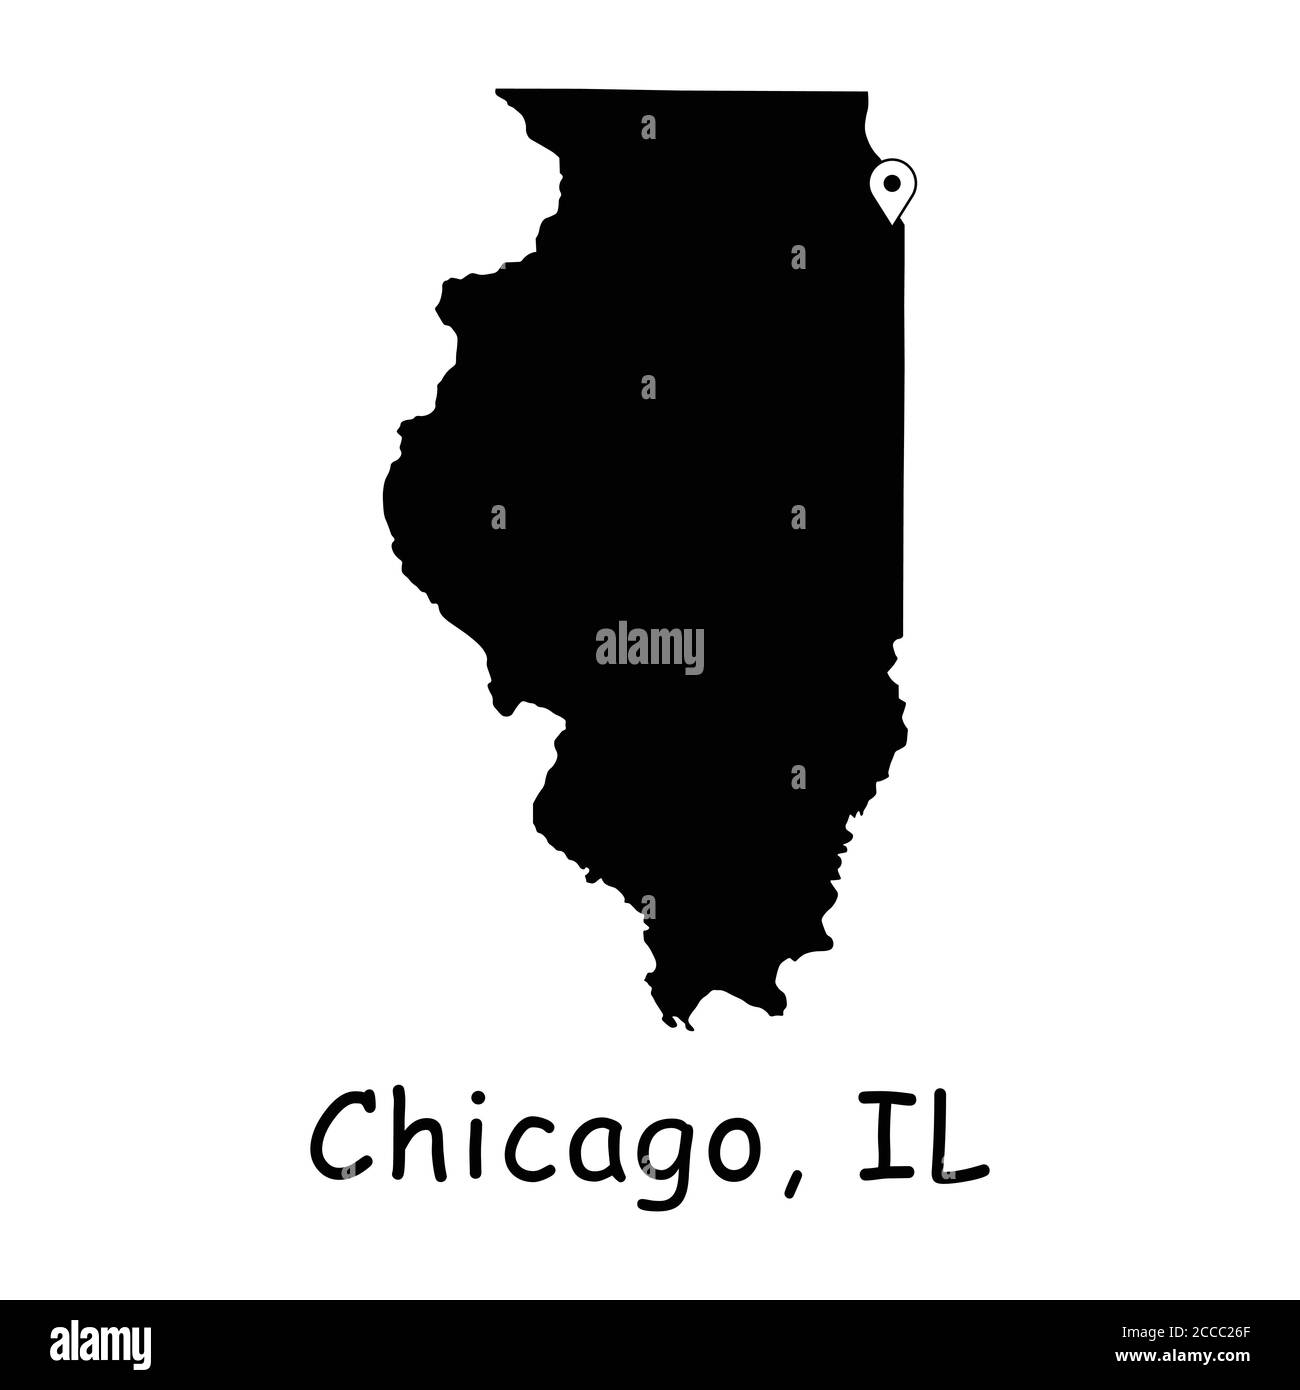 Chicago on Illinois State Map. Detailed IL State Map with Location Pin on Chicago City. Black silhouette vector map isolated on white background. Stock Vector